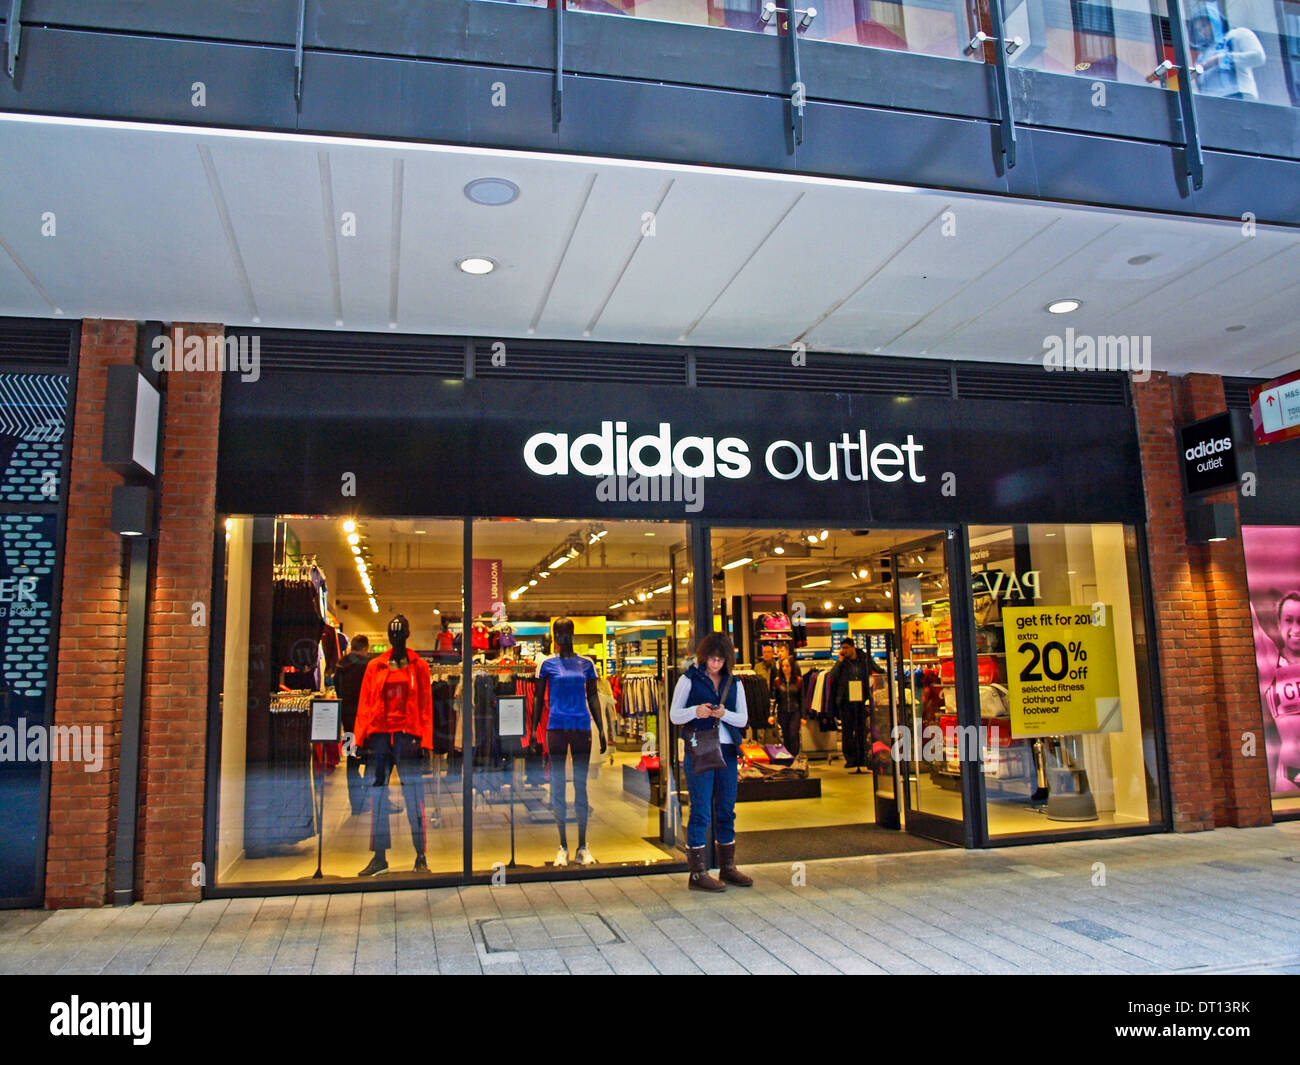 where is adidas outlet